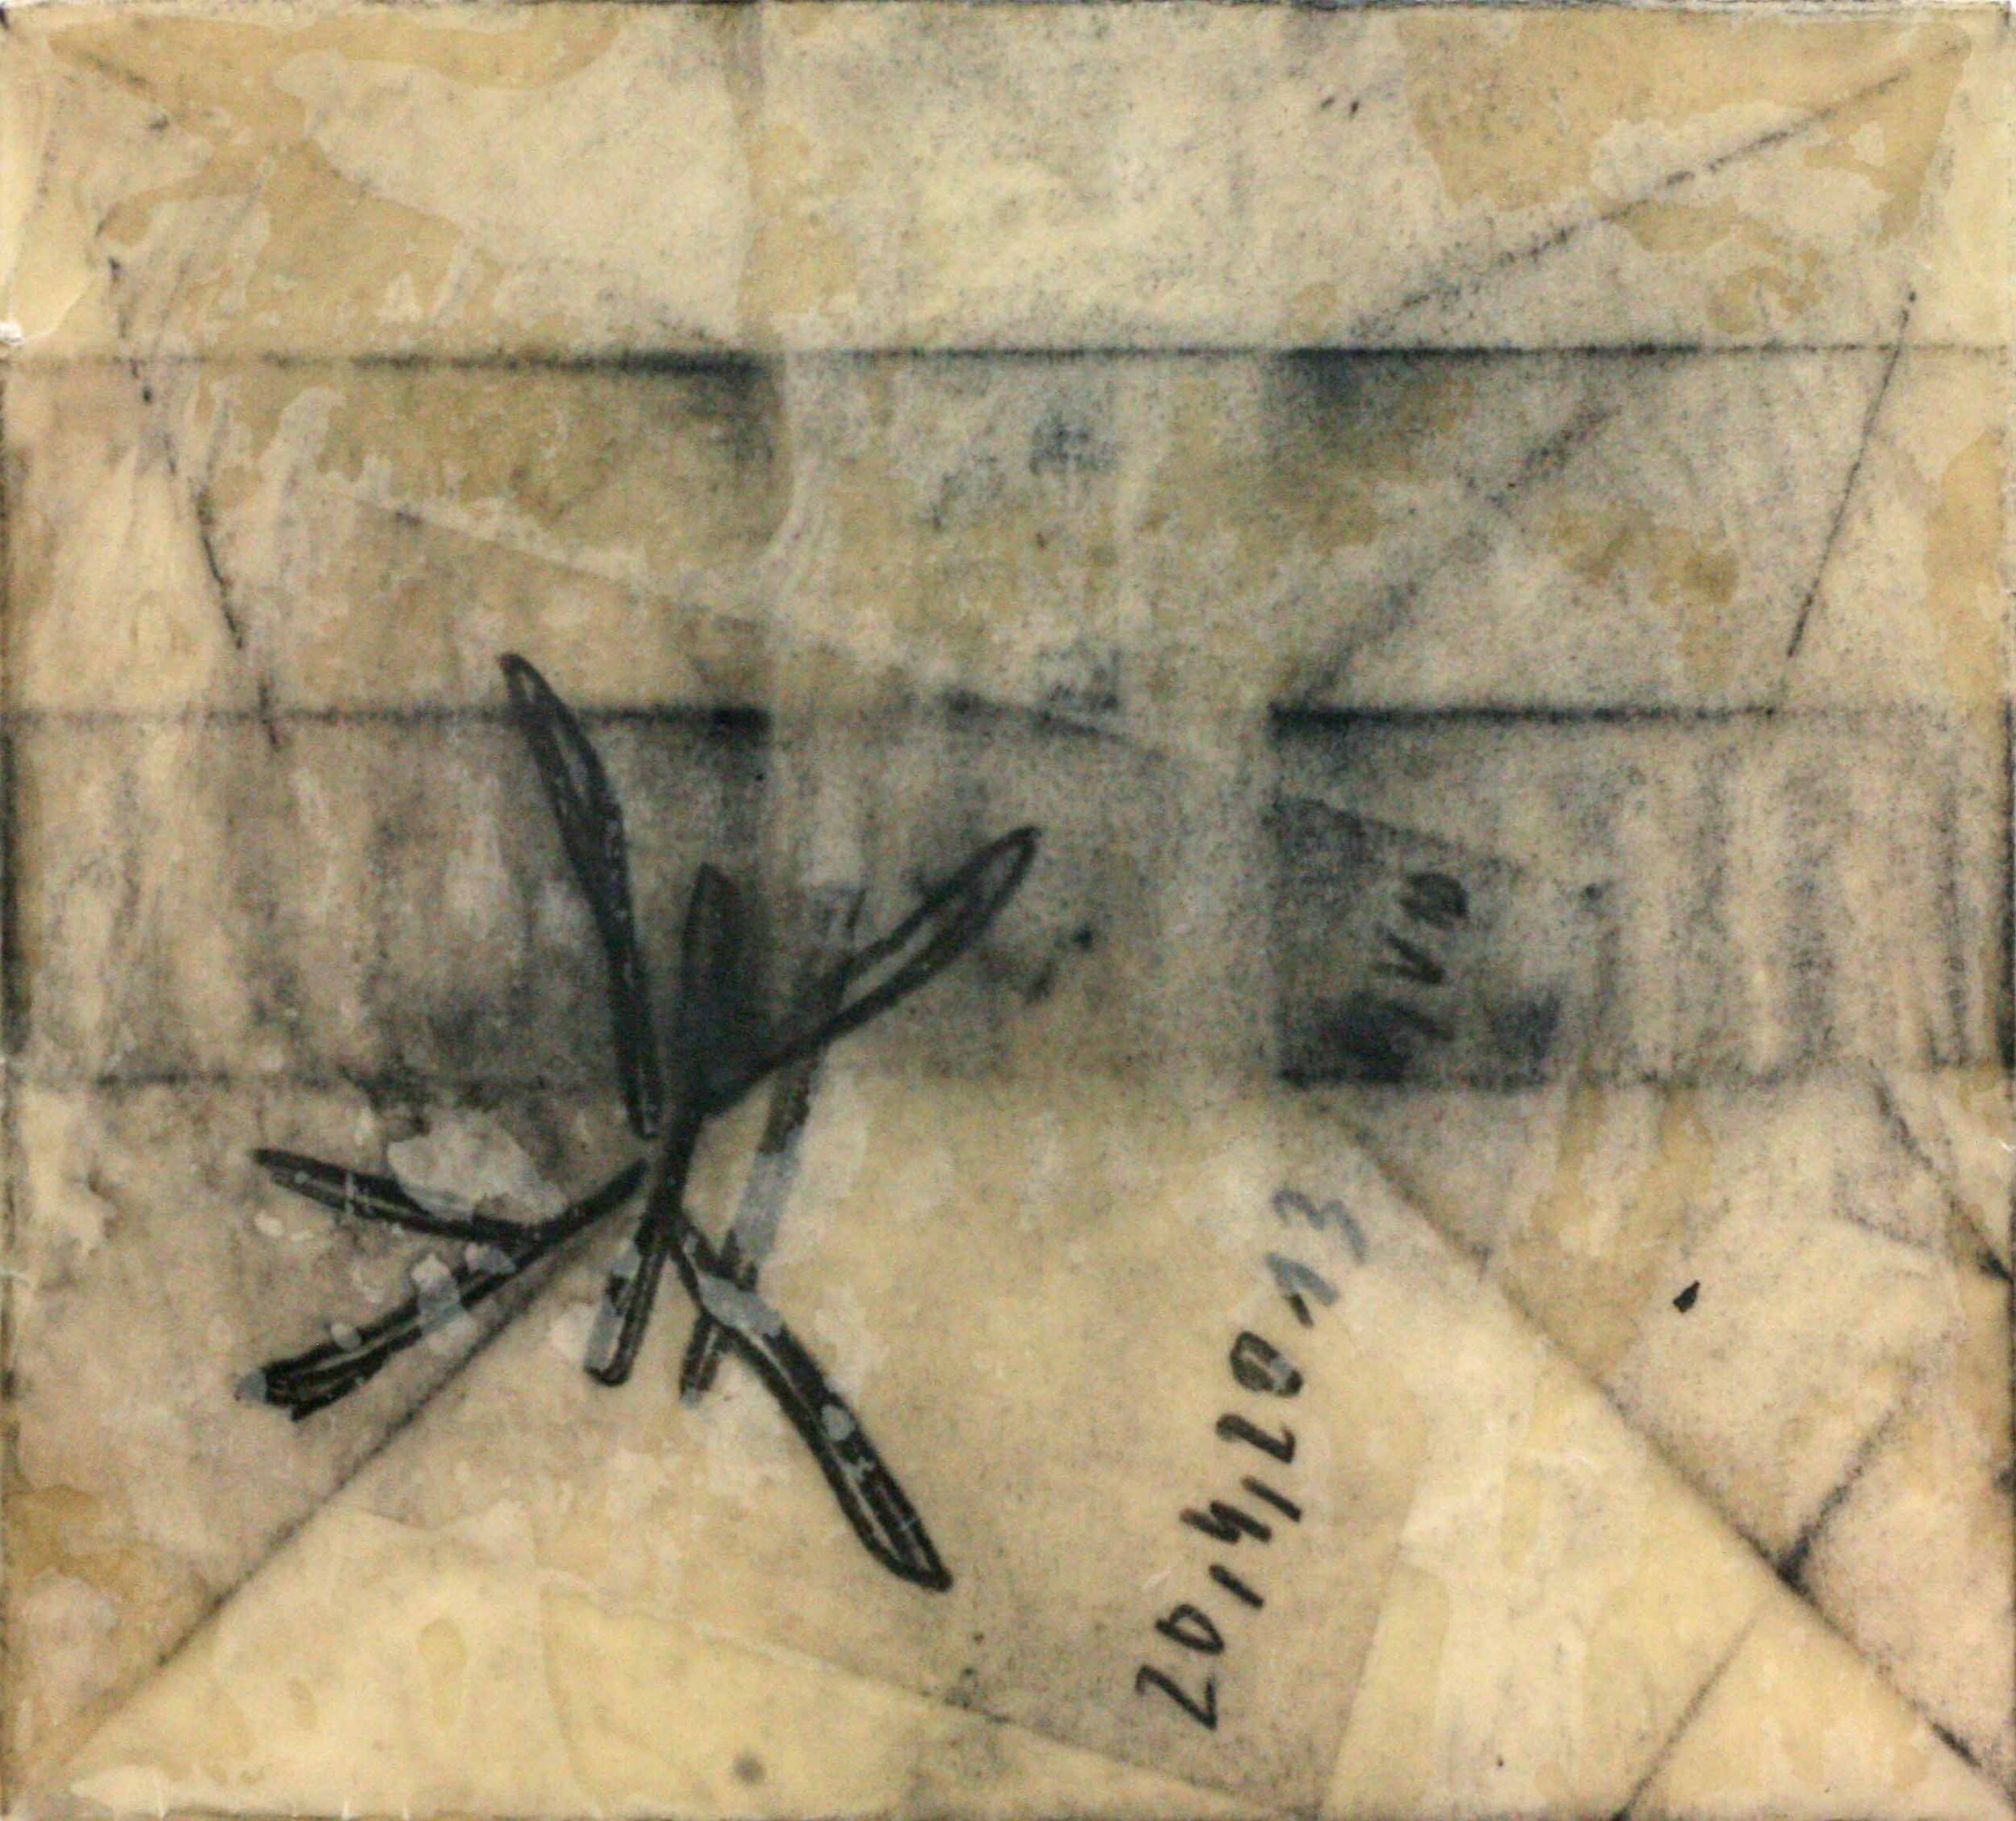  “Post / Udo Envelope (3)”, 27 × 30 cm, Pencil and Wax on Paper, 2013 